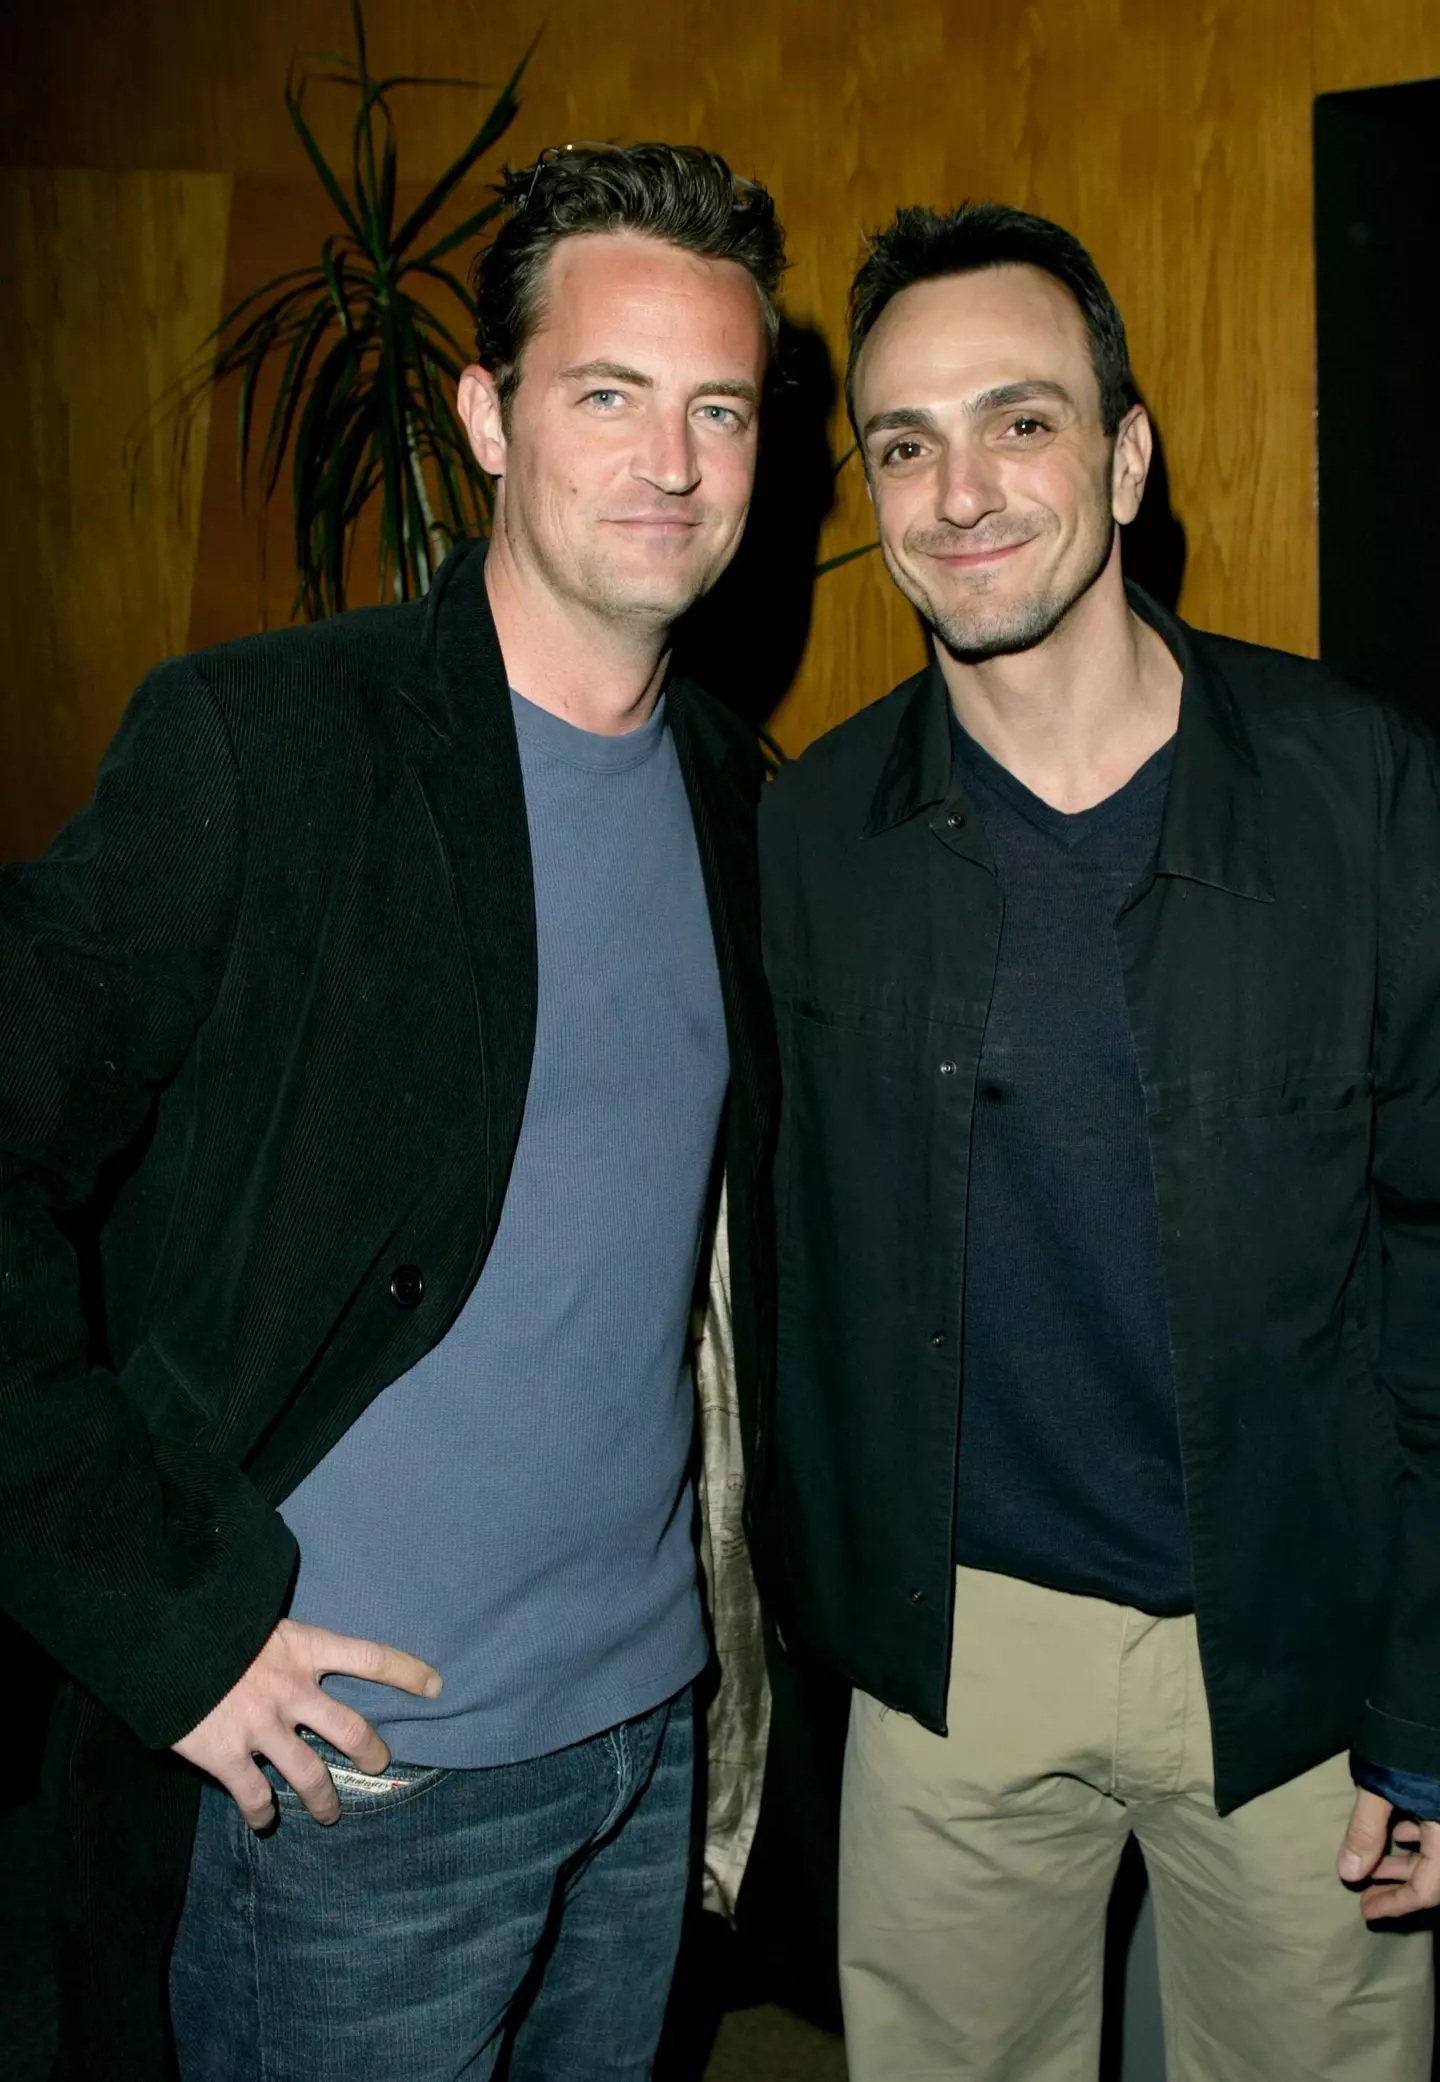 Matthew Perry and Hank Azaria starred in Friends together.